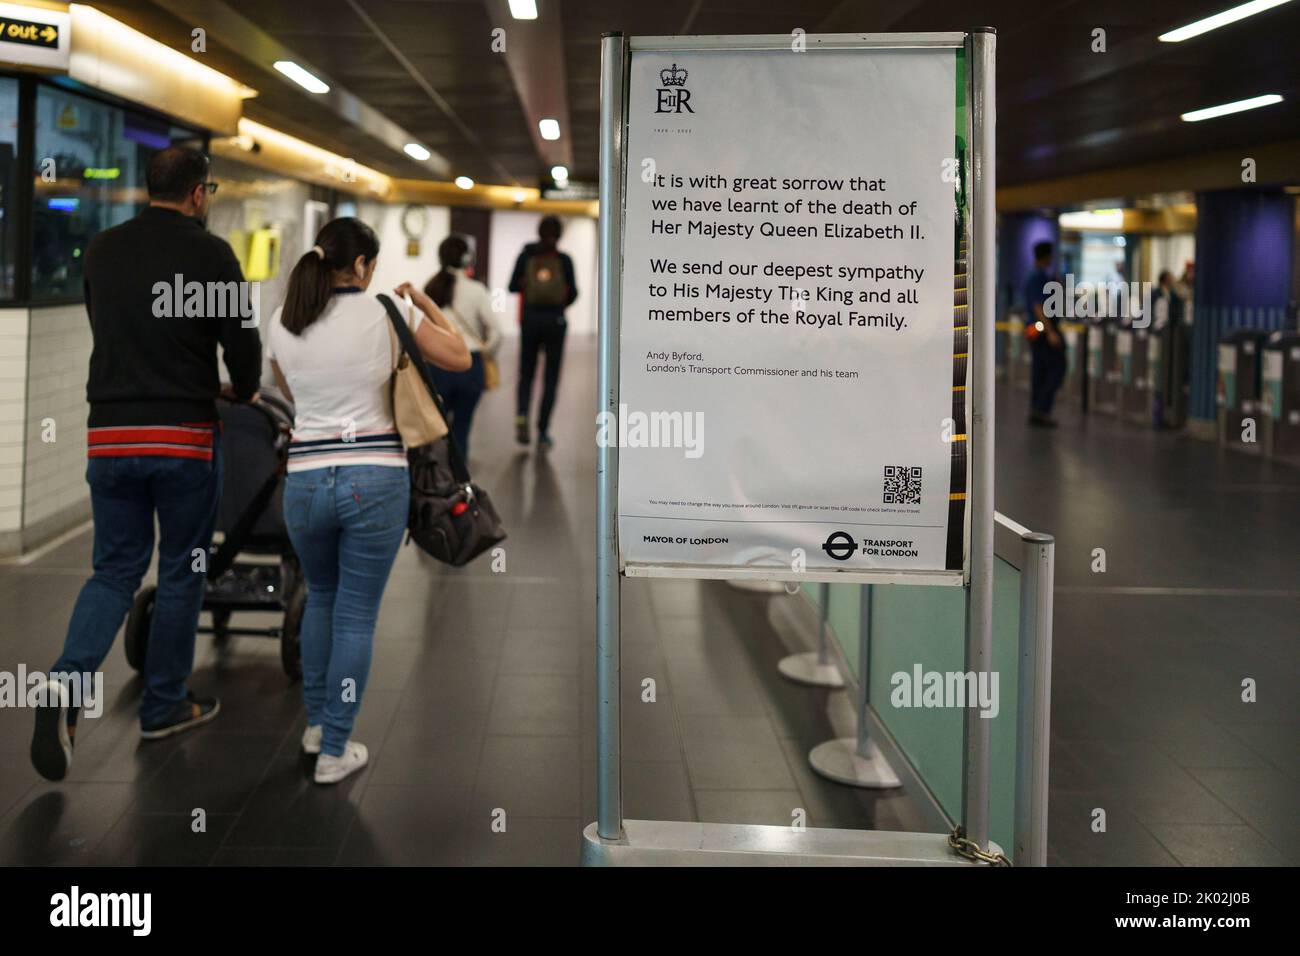 LONDON - SEPTEMBER 9: Death of Queen Elizabeth II. Charing Cross underground station in Central London. A notice from London's Transport Commissioner, offers sympathy to King Charles and other members of the Royal Family. Photo: Credit: 2022 David Levenson/Alamy Live News Stock Photo